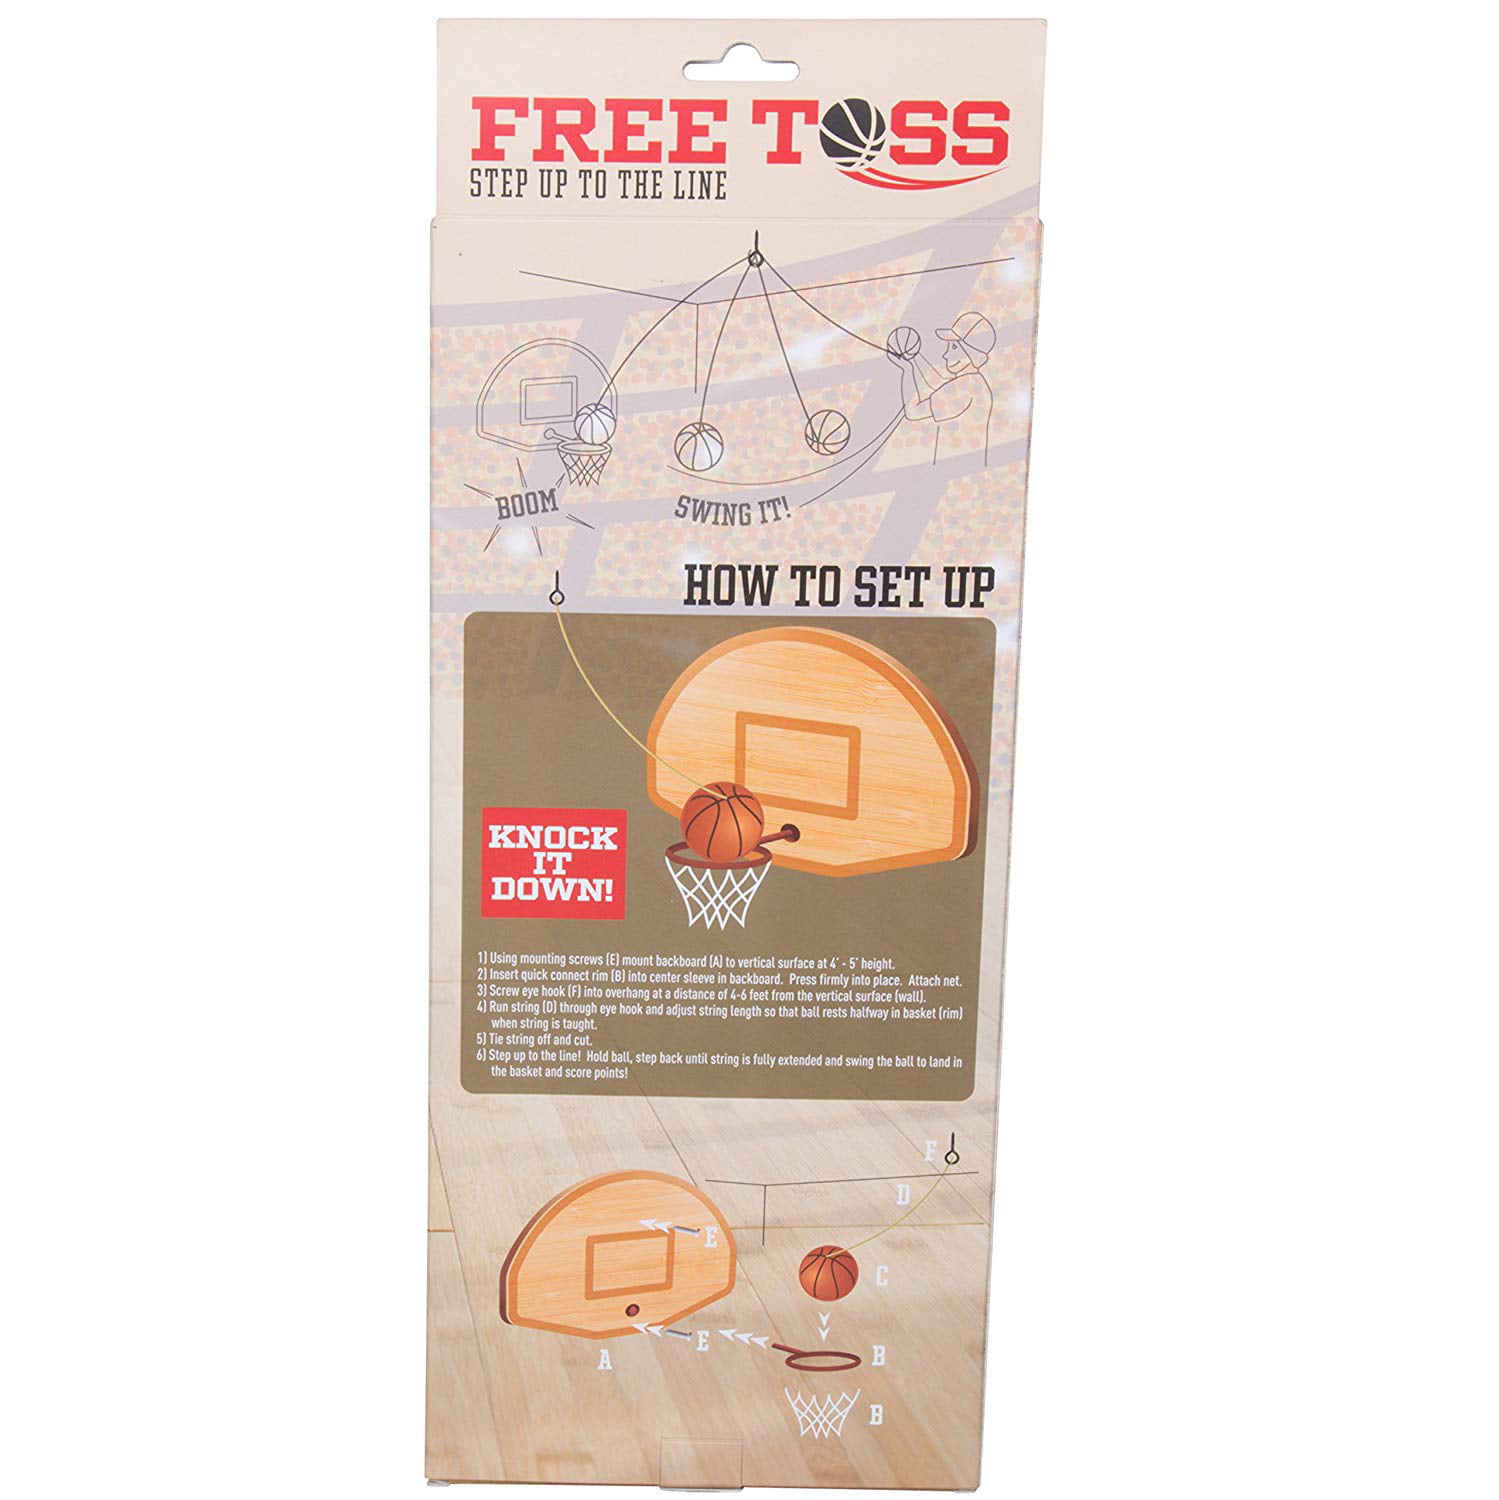 Be First to Basket 100 All for sale online Tiki Toss Basketball and Hoop Swing Game Toss 